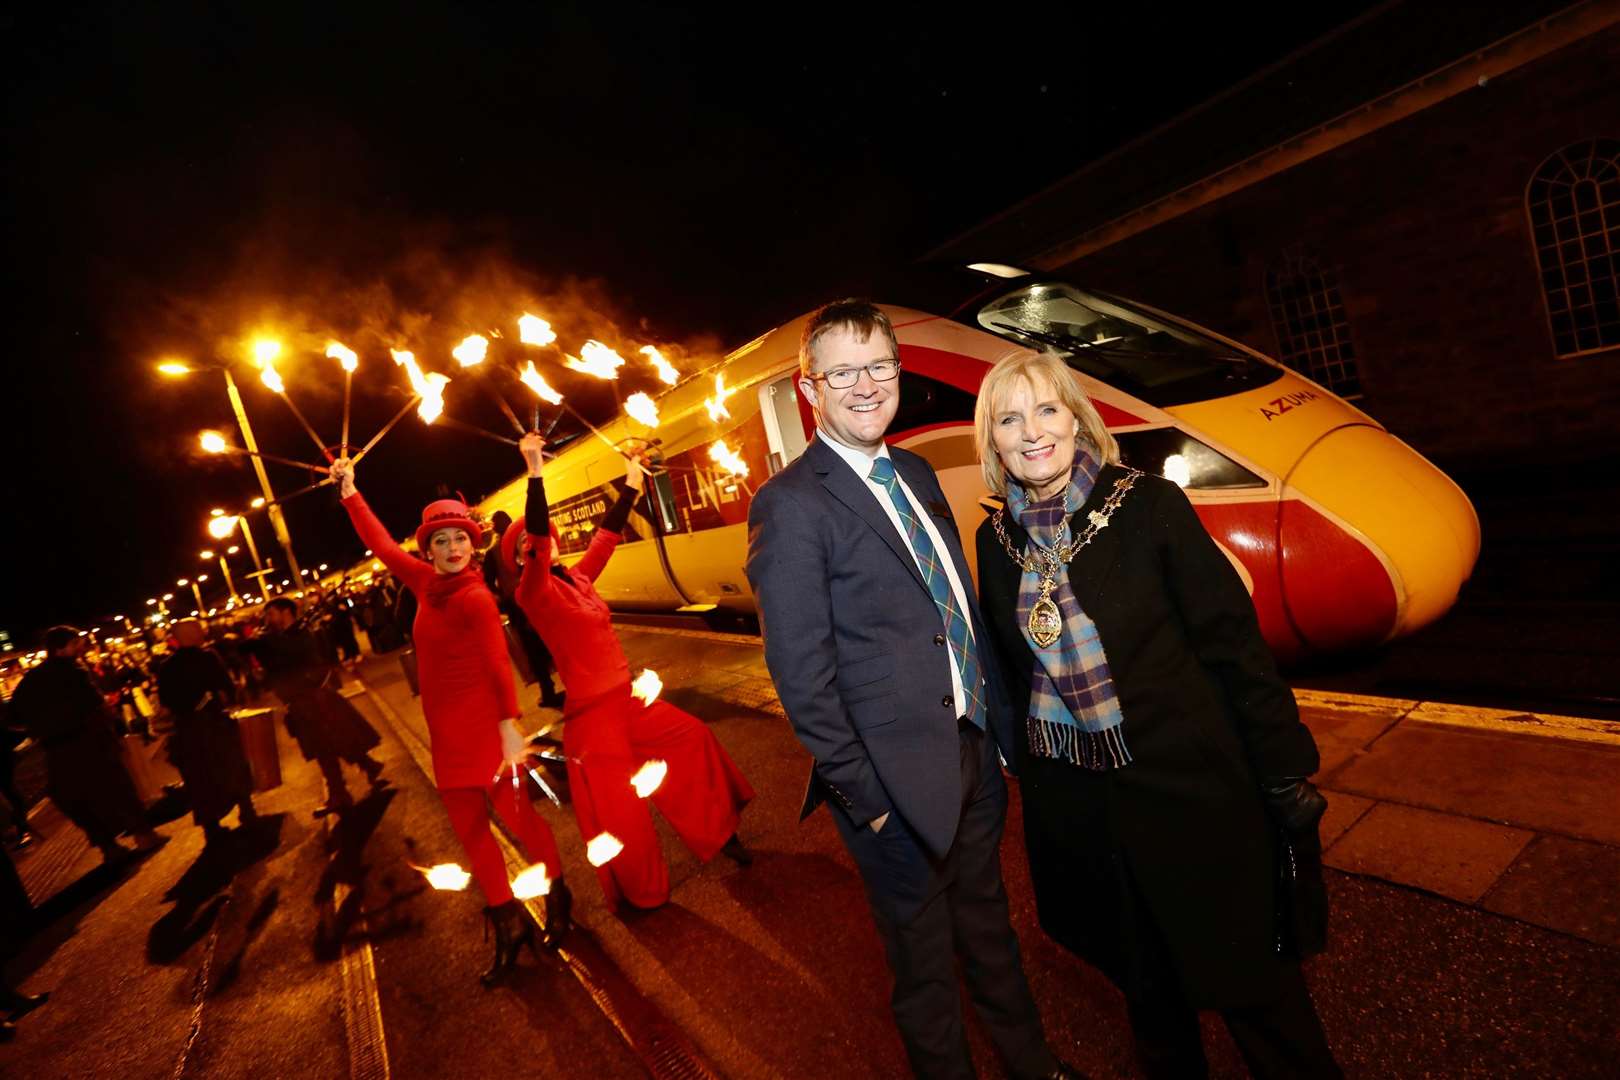 LNER managing director David Horne and Provost Helen Carmichael mark the strat of the first Azuma train on the Highland Chieftain route. Please credit: LNER/CREST PHOTOGRAPHY